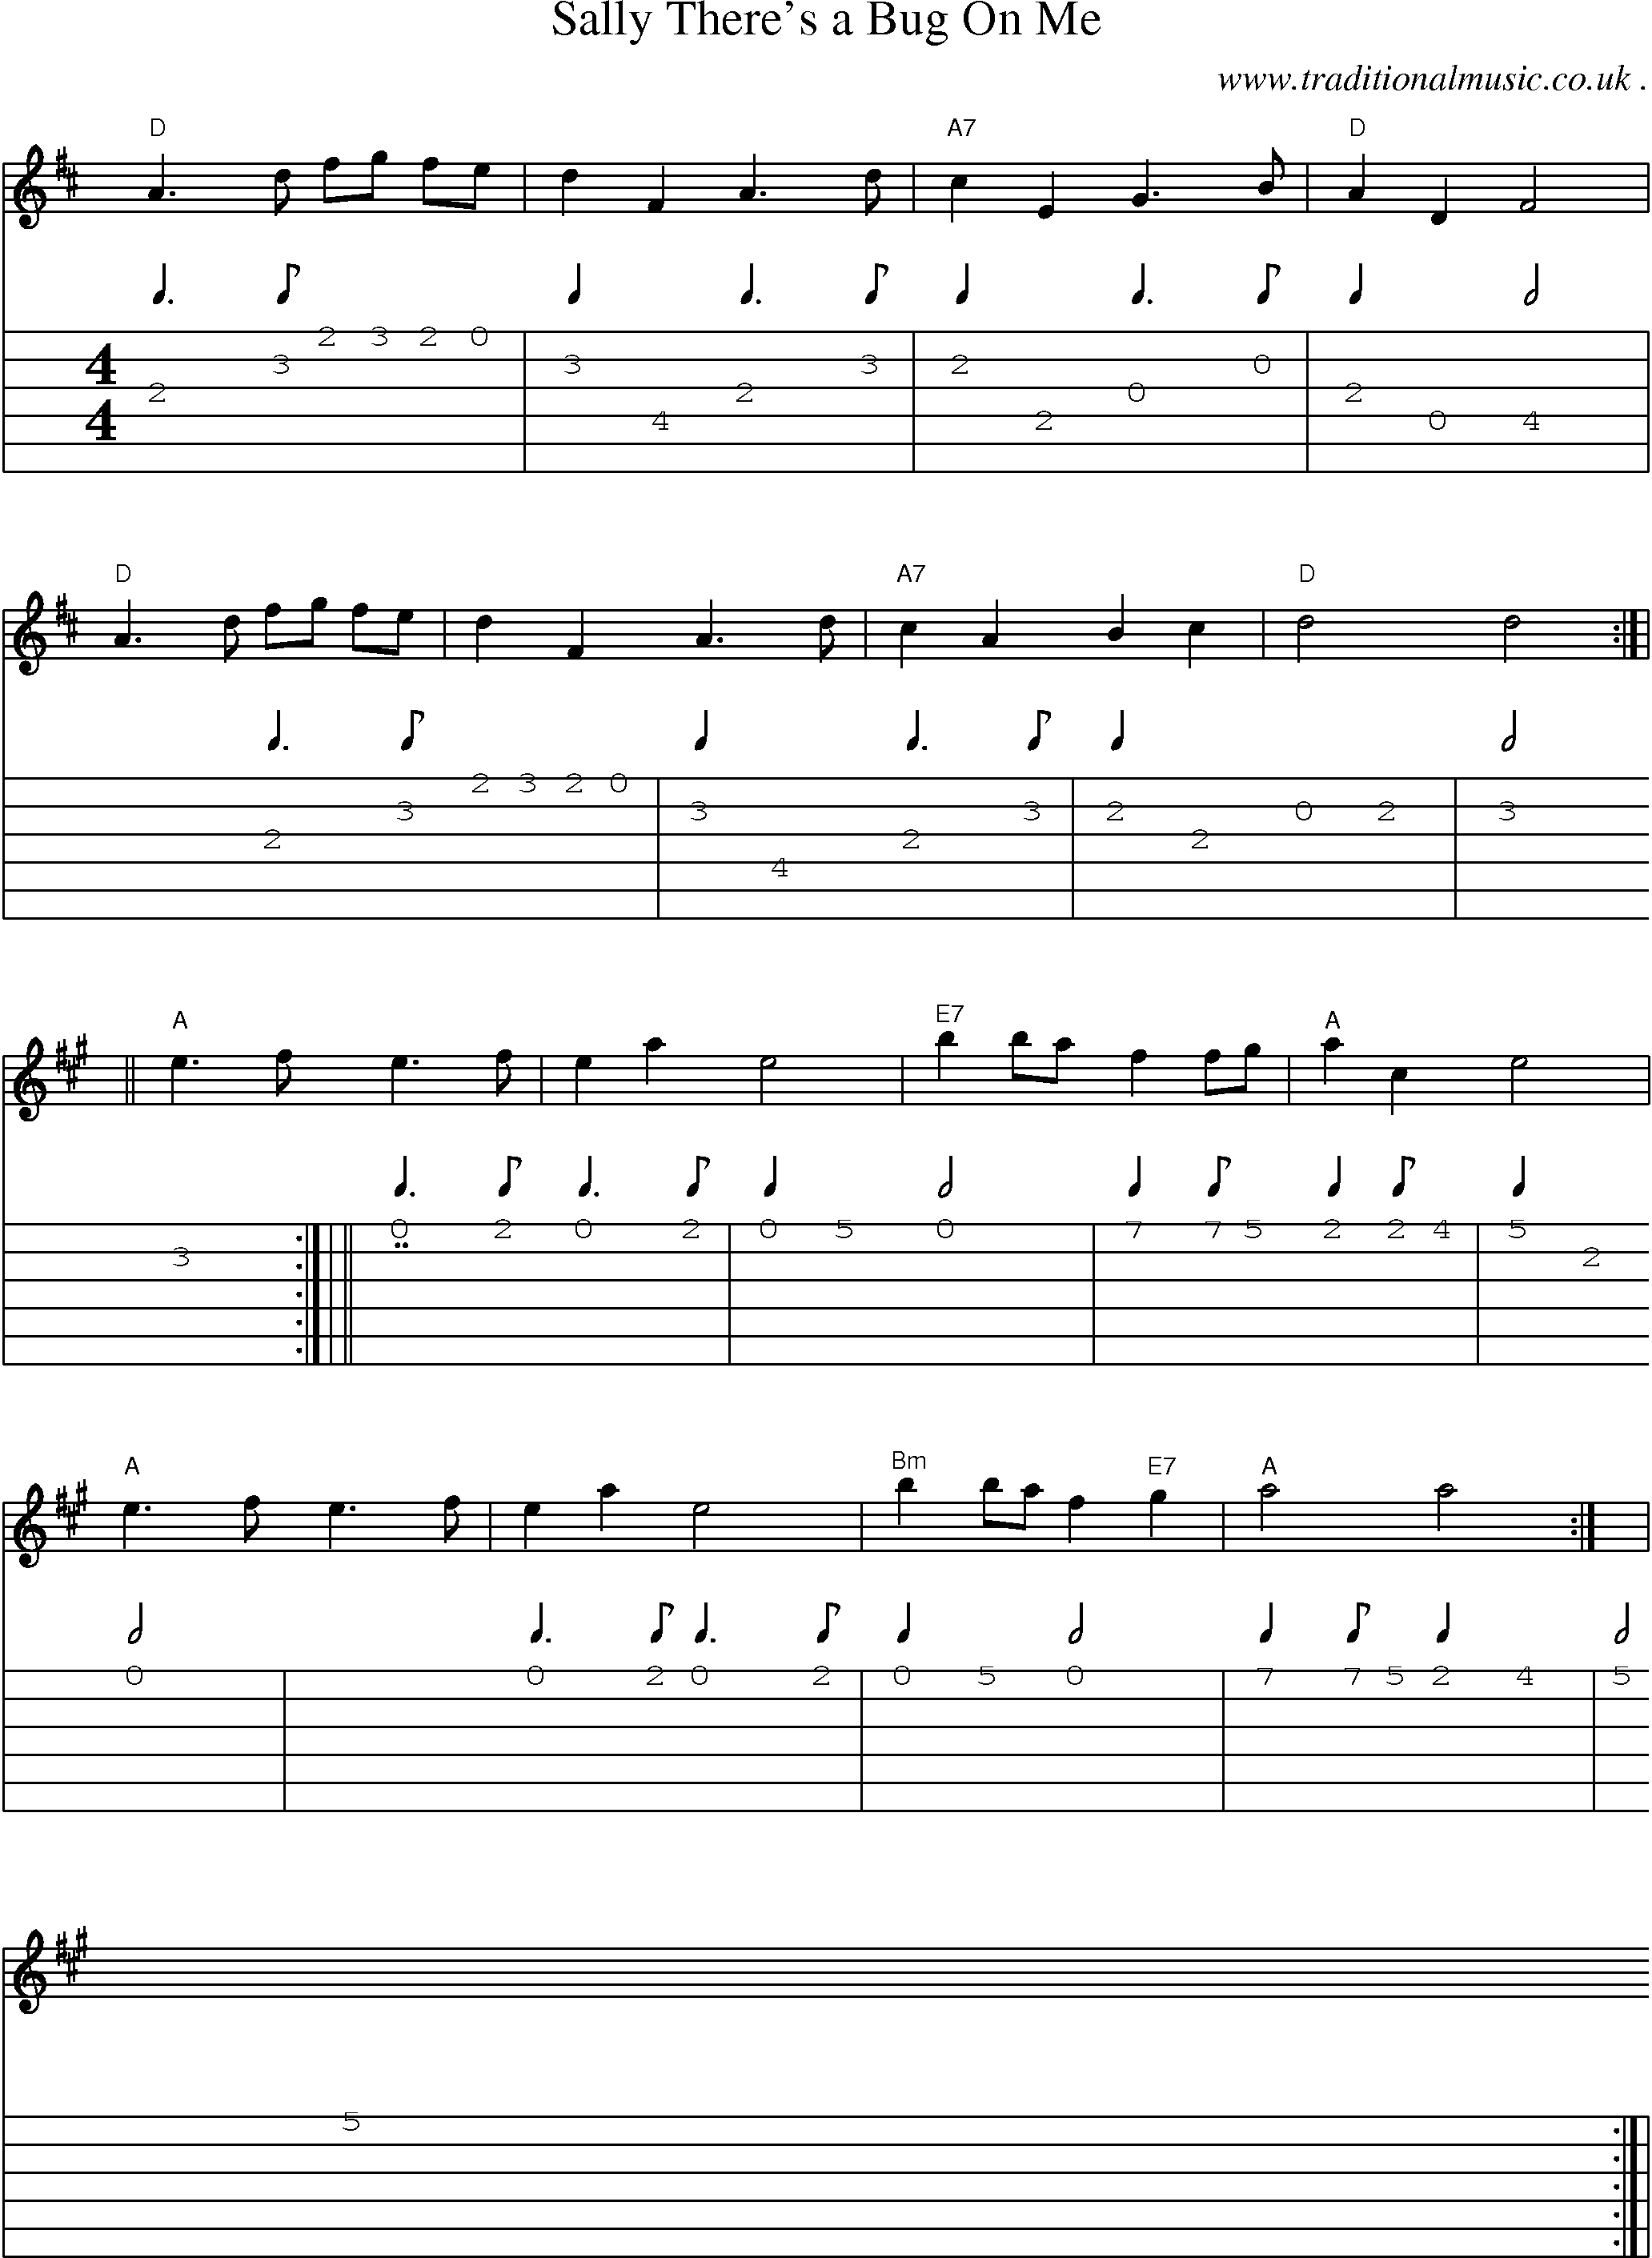 Sheet-music  score, Chords and Guitar Tabs for Sally Theres A Bug On Me